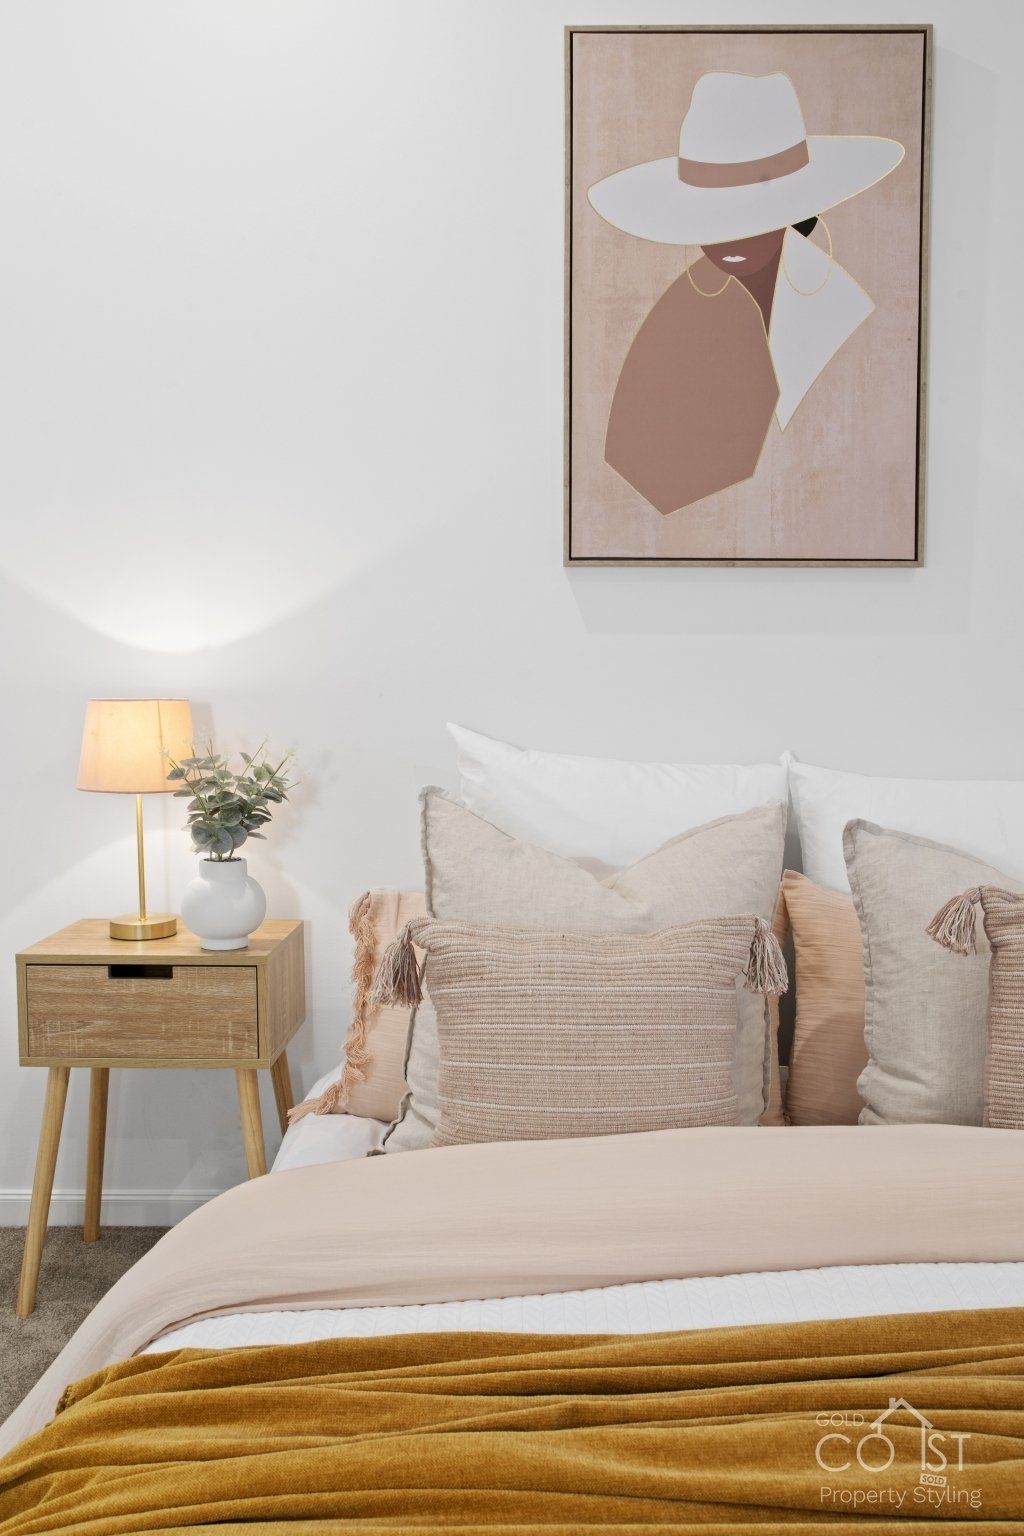 contempary bed staging with artwork